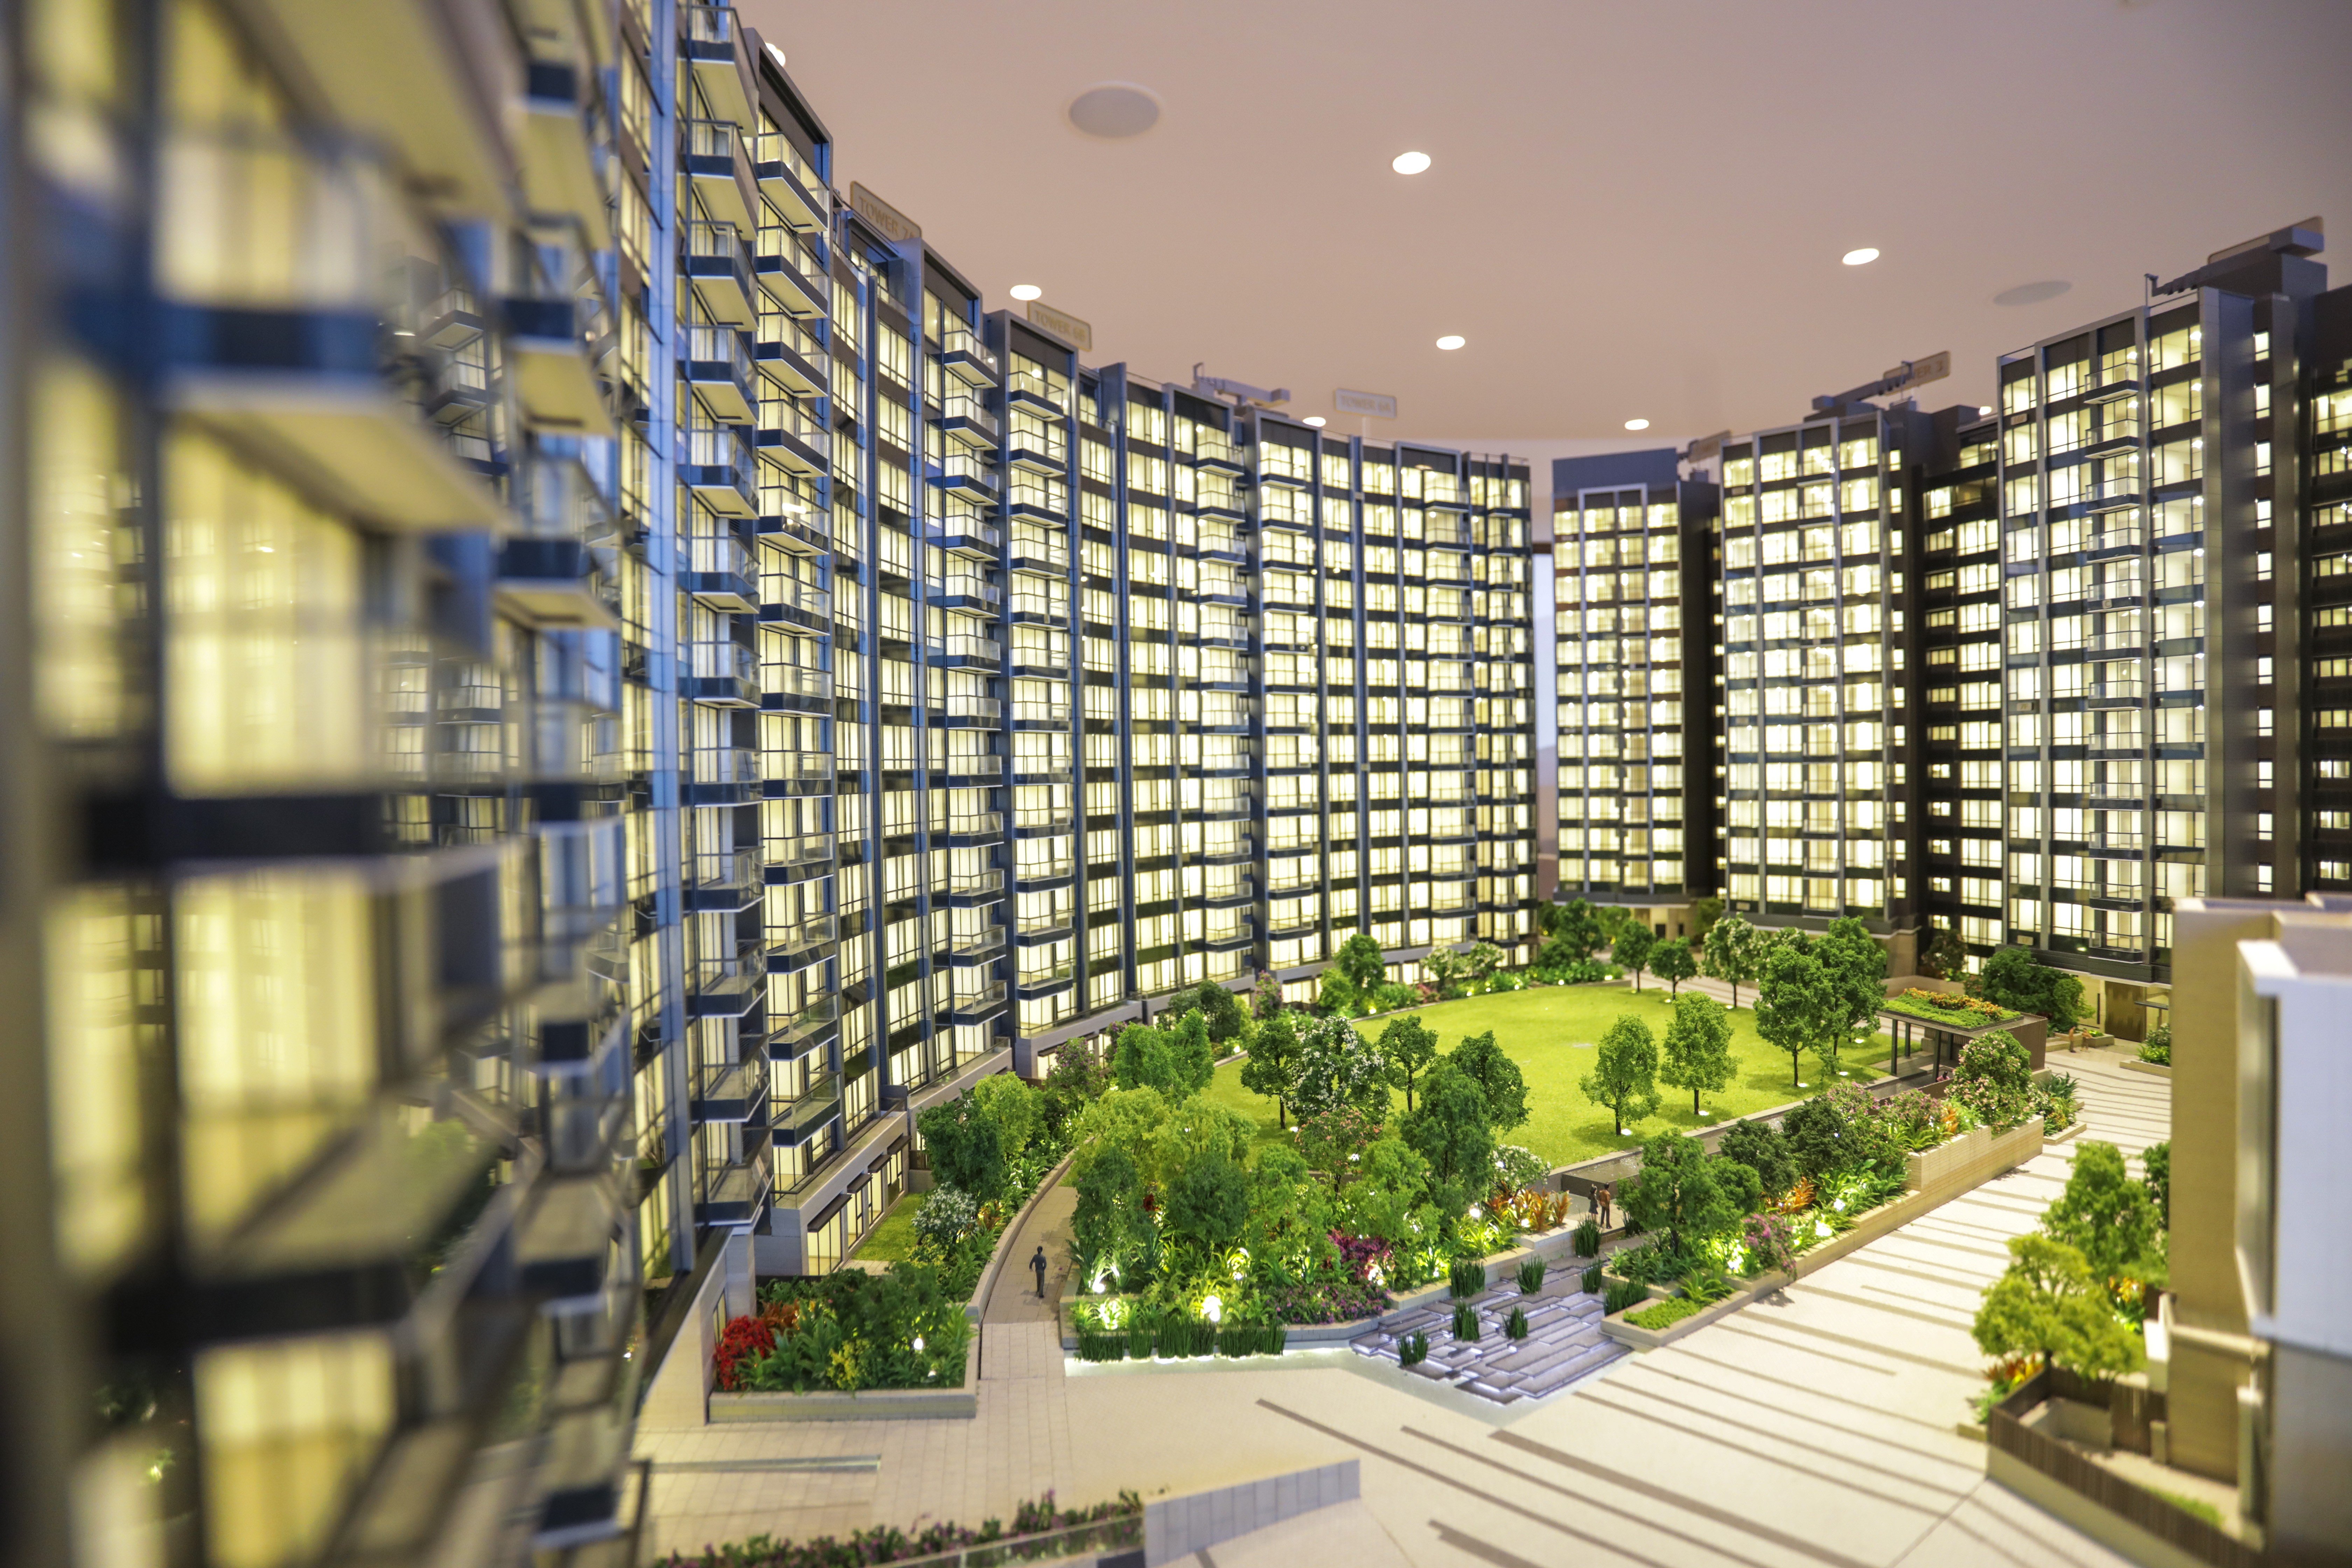 A model of Great Eagle’s latest development, a residential project called Ontolo, in Tai Po, Hong Kong. Photo: Tory Ho